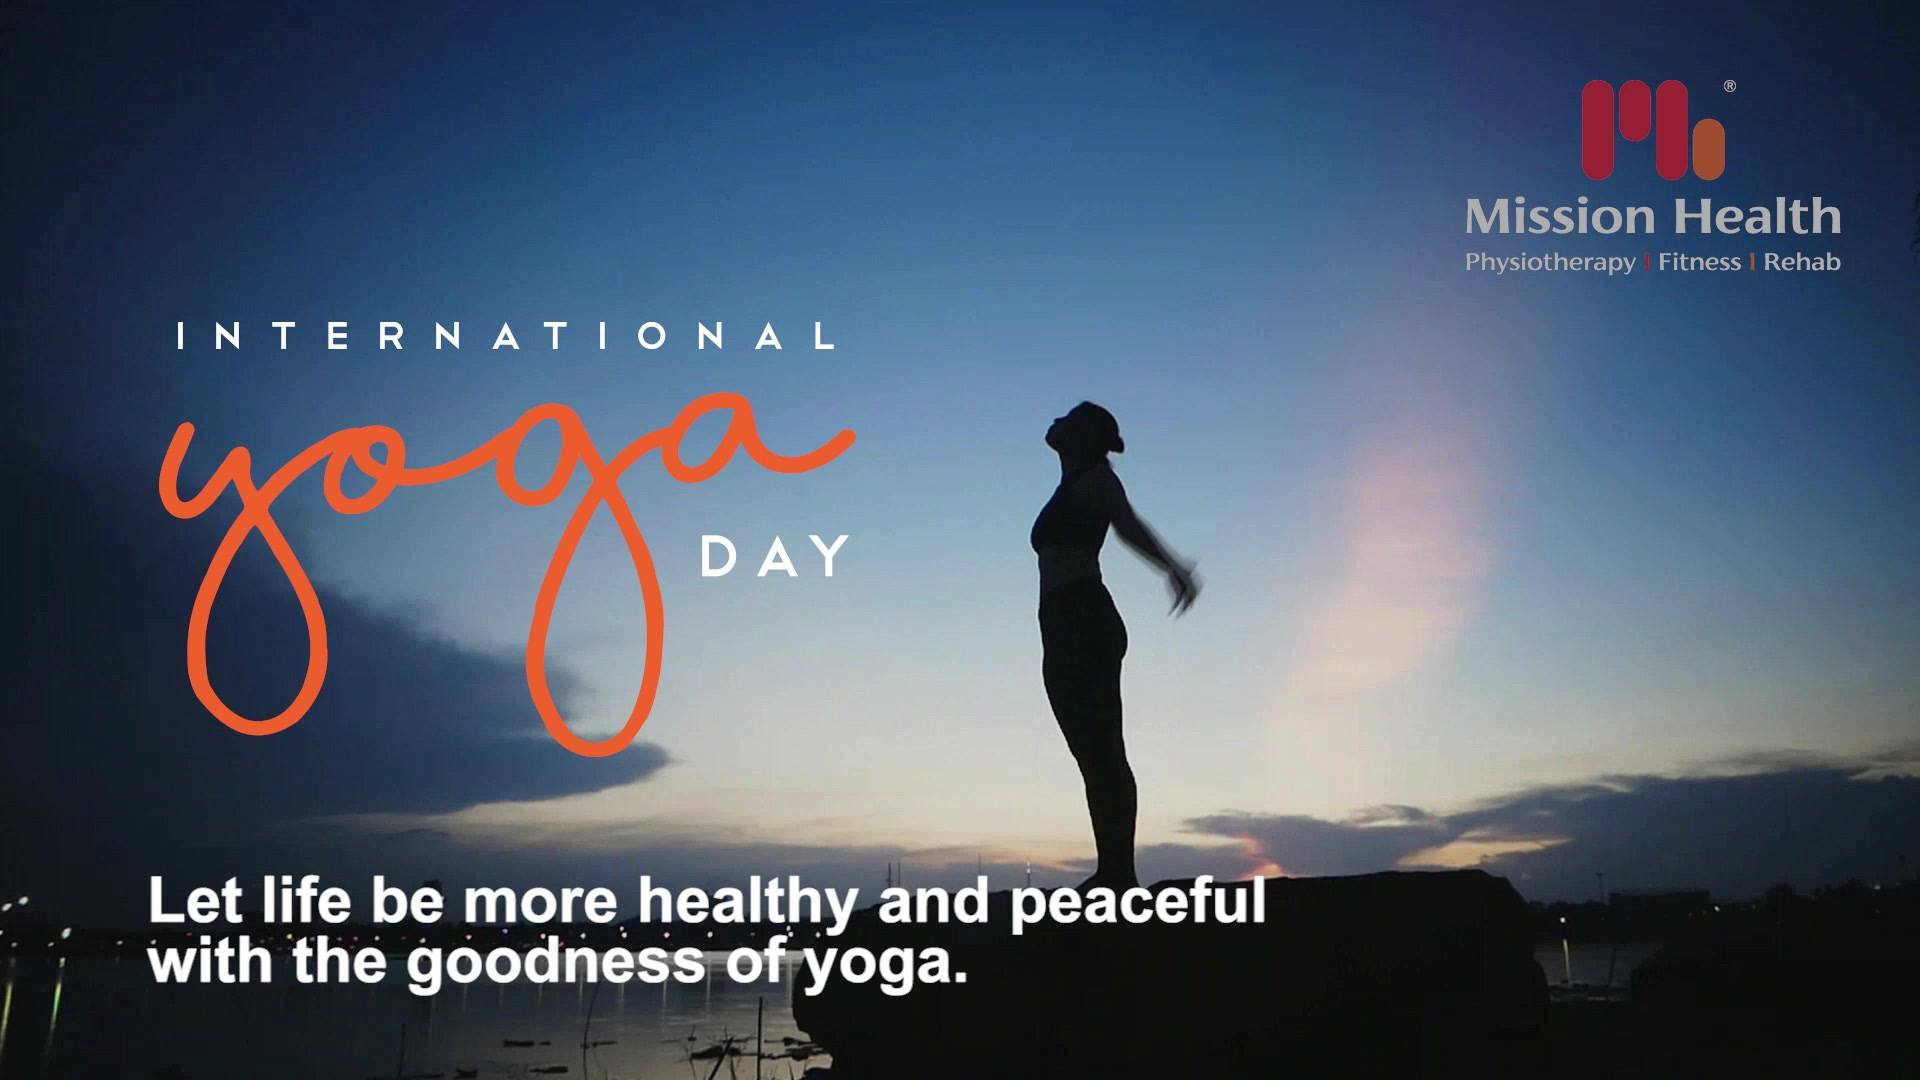 Let life be more healthy and peaceful with the goodness of yoga.

#YogaDay #InternationalDayOfYoga #Yoga #MissionHealthIndia #MovementIsLife #AbilityClinic #MissionHealth #healthylifestyle